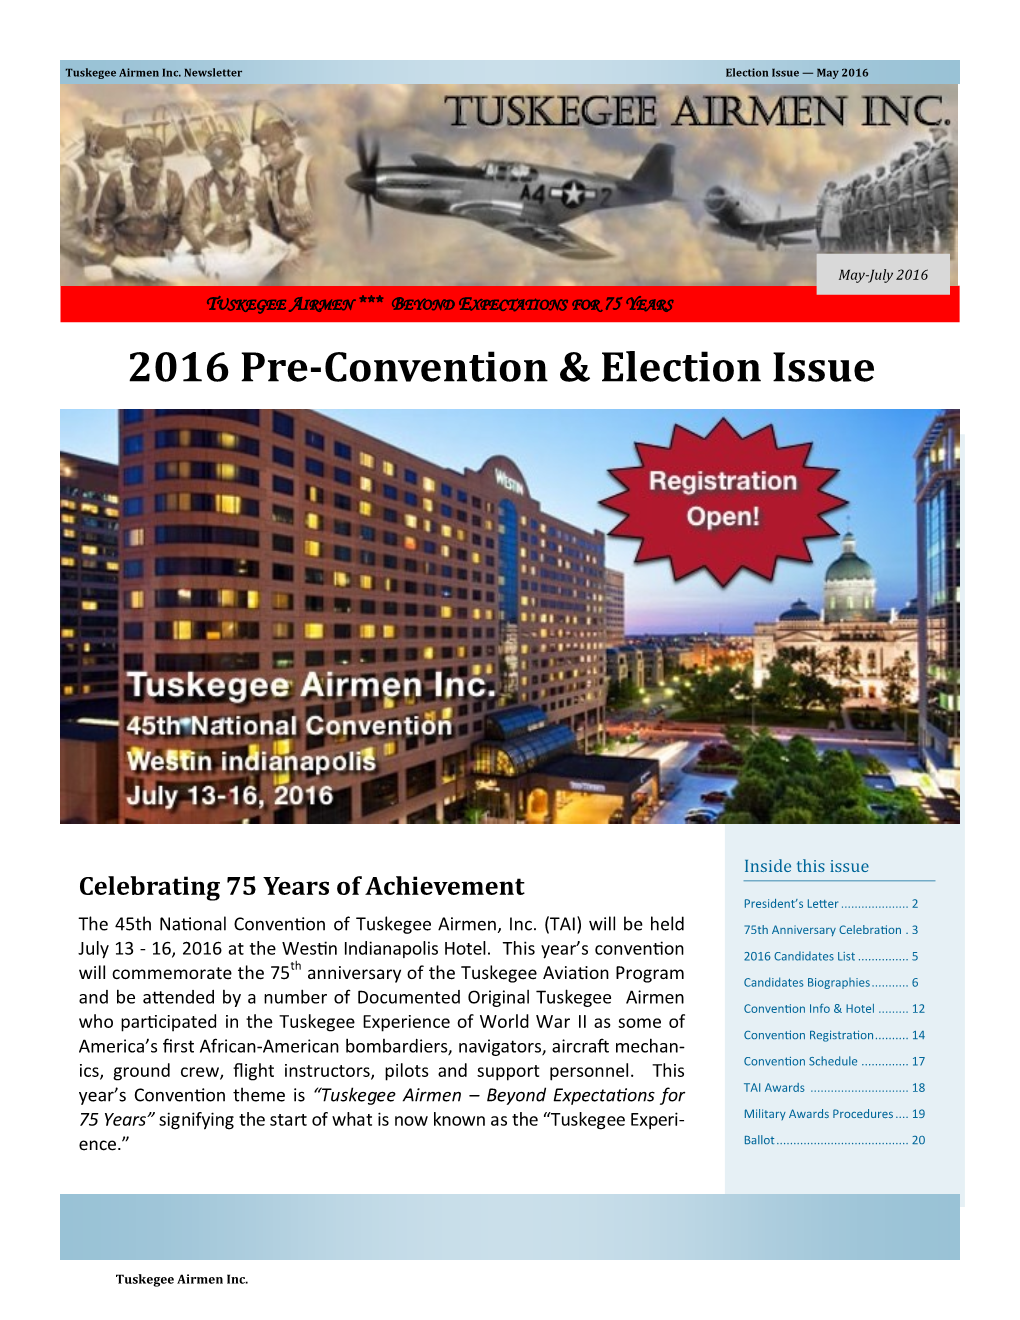 2016 Pre-Convention & Election Issue